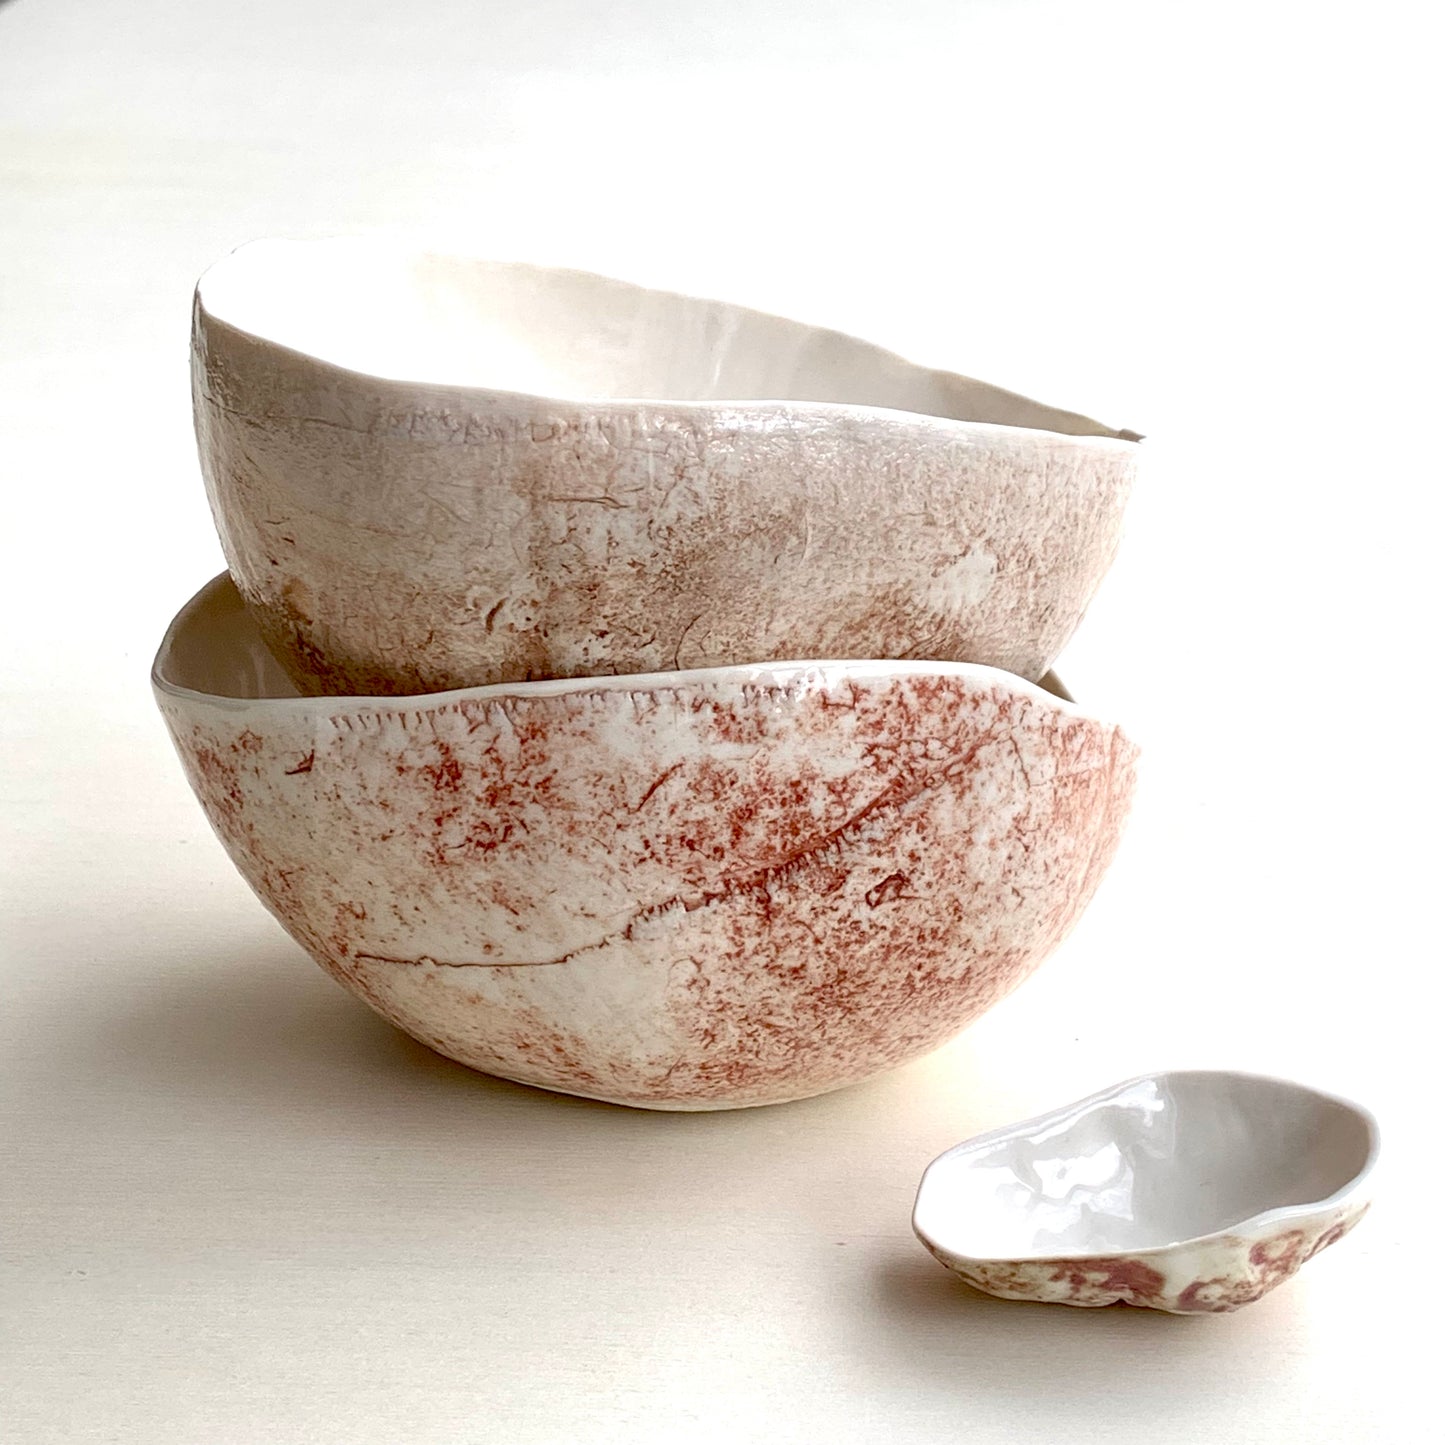 Unique handmade white porcelain ceramic bowl from the Amazon collection. This large bowl made of porcelain enriches your table setting with an elegant organic feel or will surprise someone as a personal ceramic gift. A one of a kind signature piece of tableware with a unique design and earth pigment